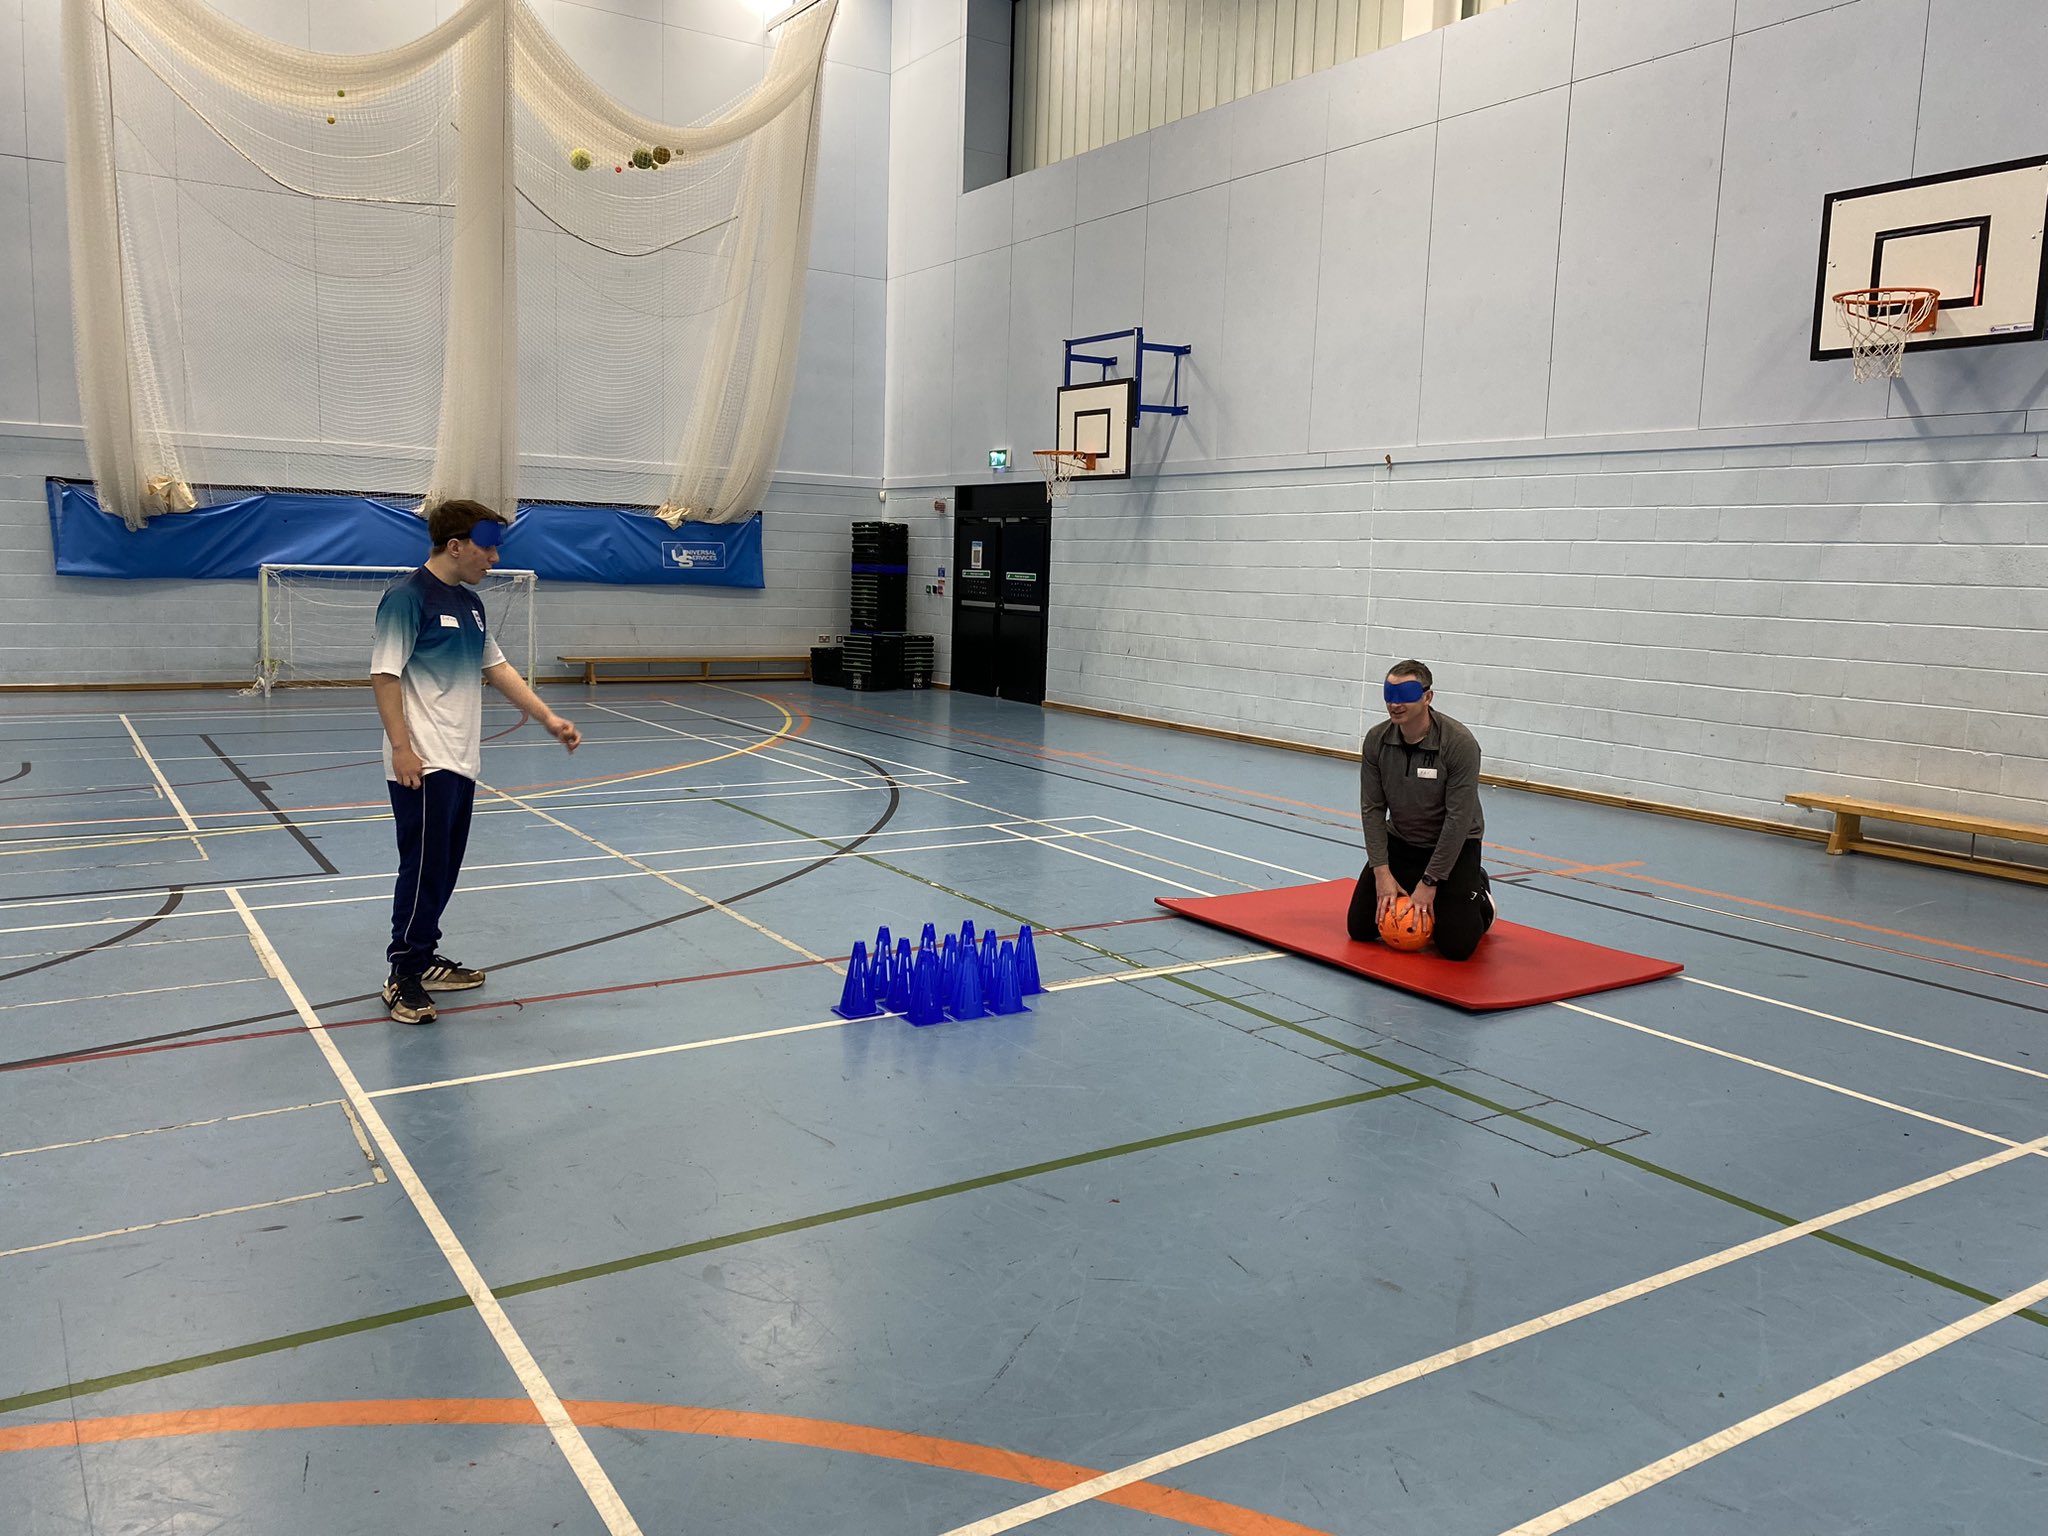 Action shot of two candidates on the Goalball School Leaders Course practicing one of the activities: ten cone bowling.